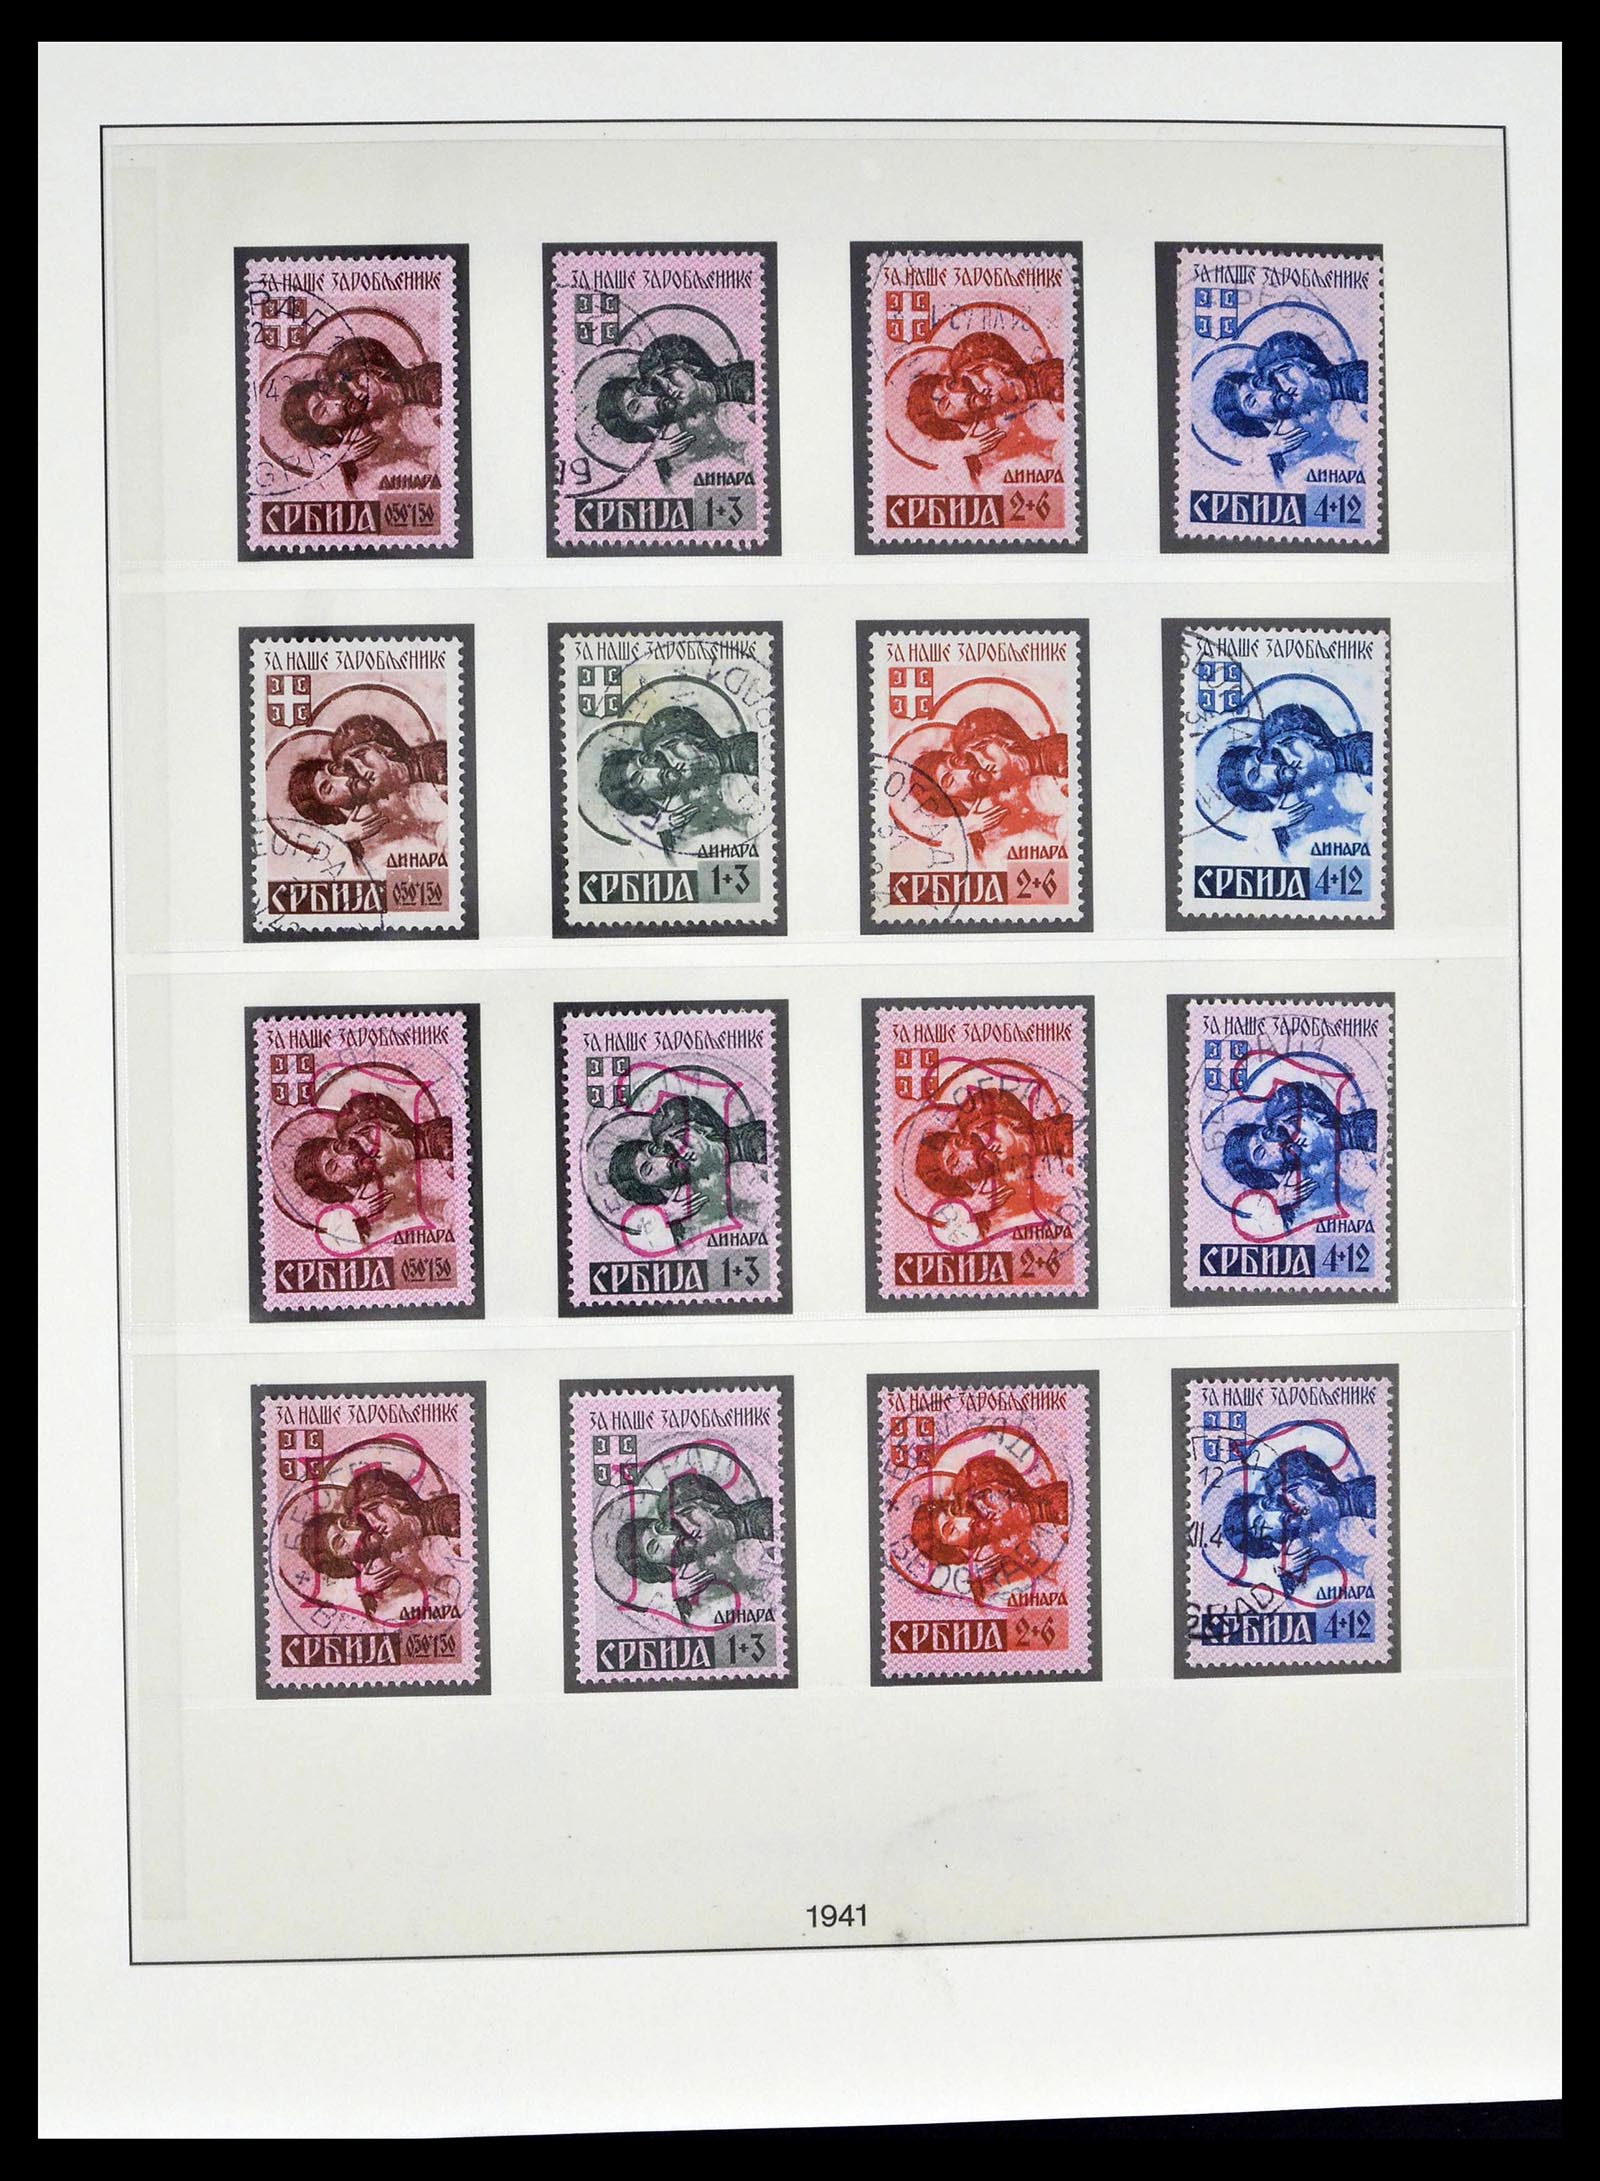 39396 0017 - Stamp collection 39396 German occupation WW II 1939-1945.